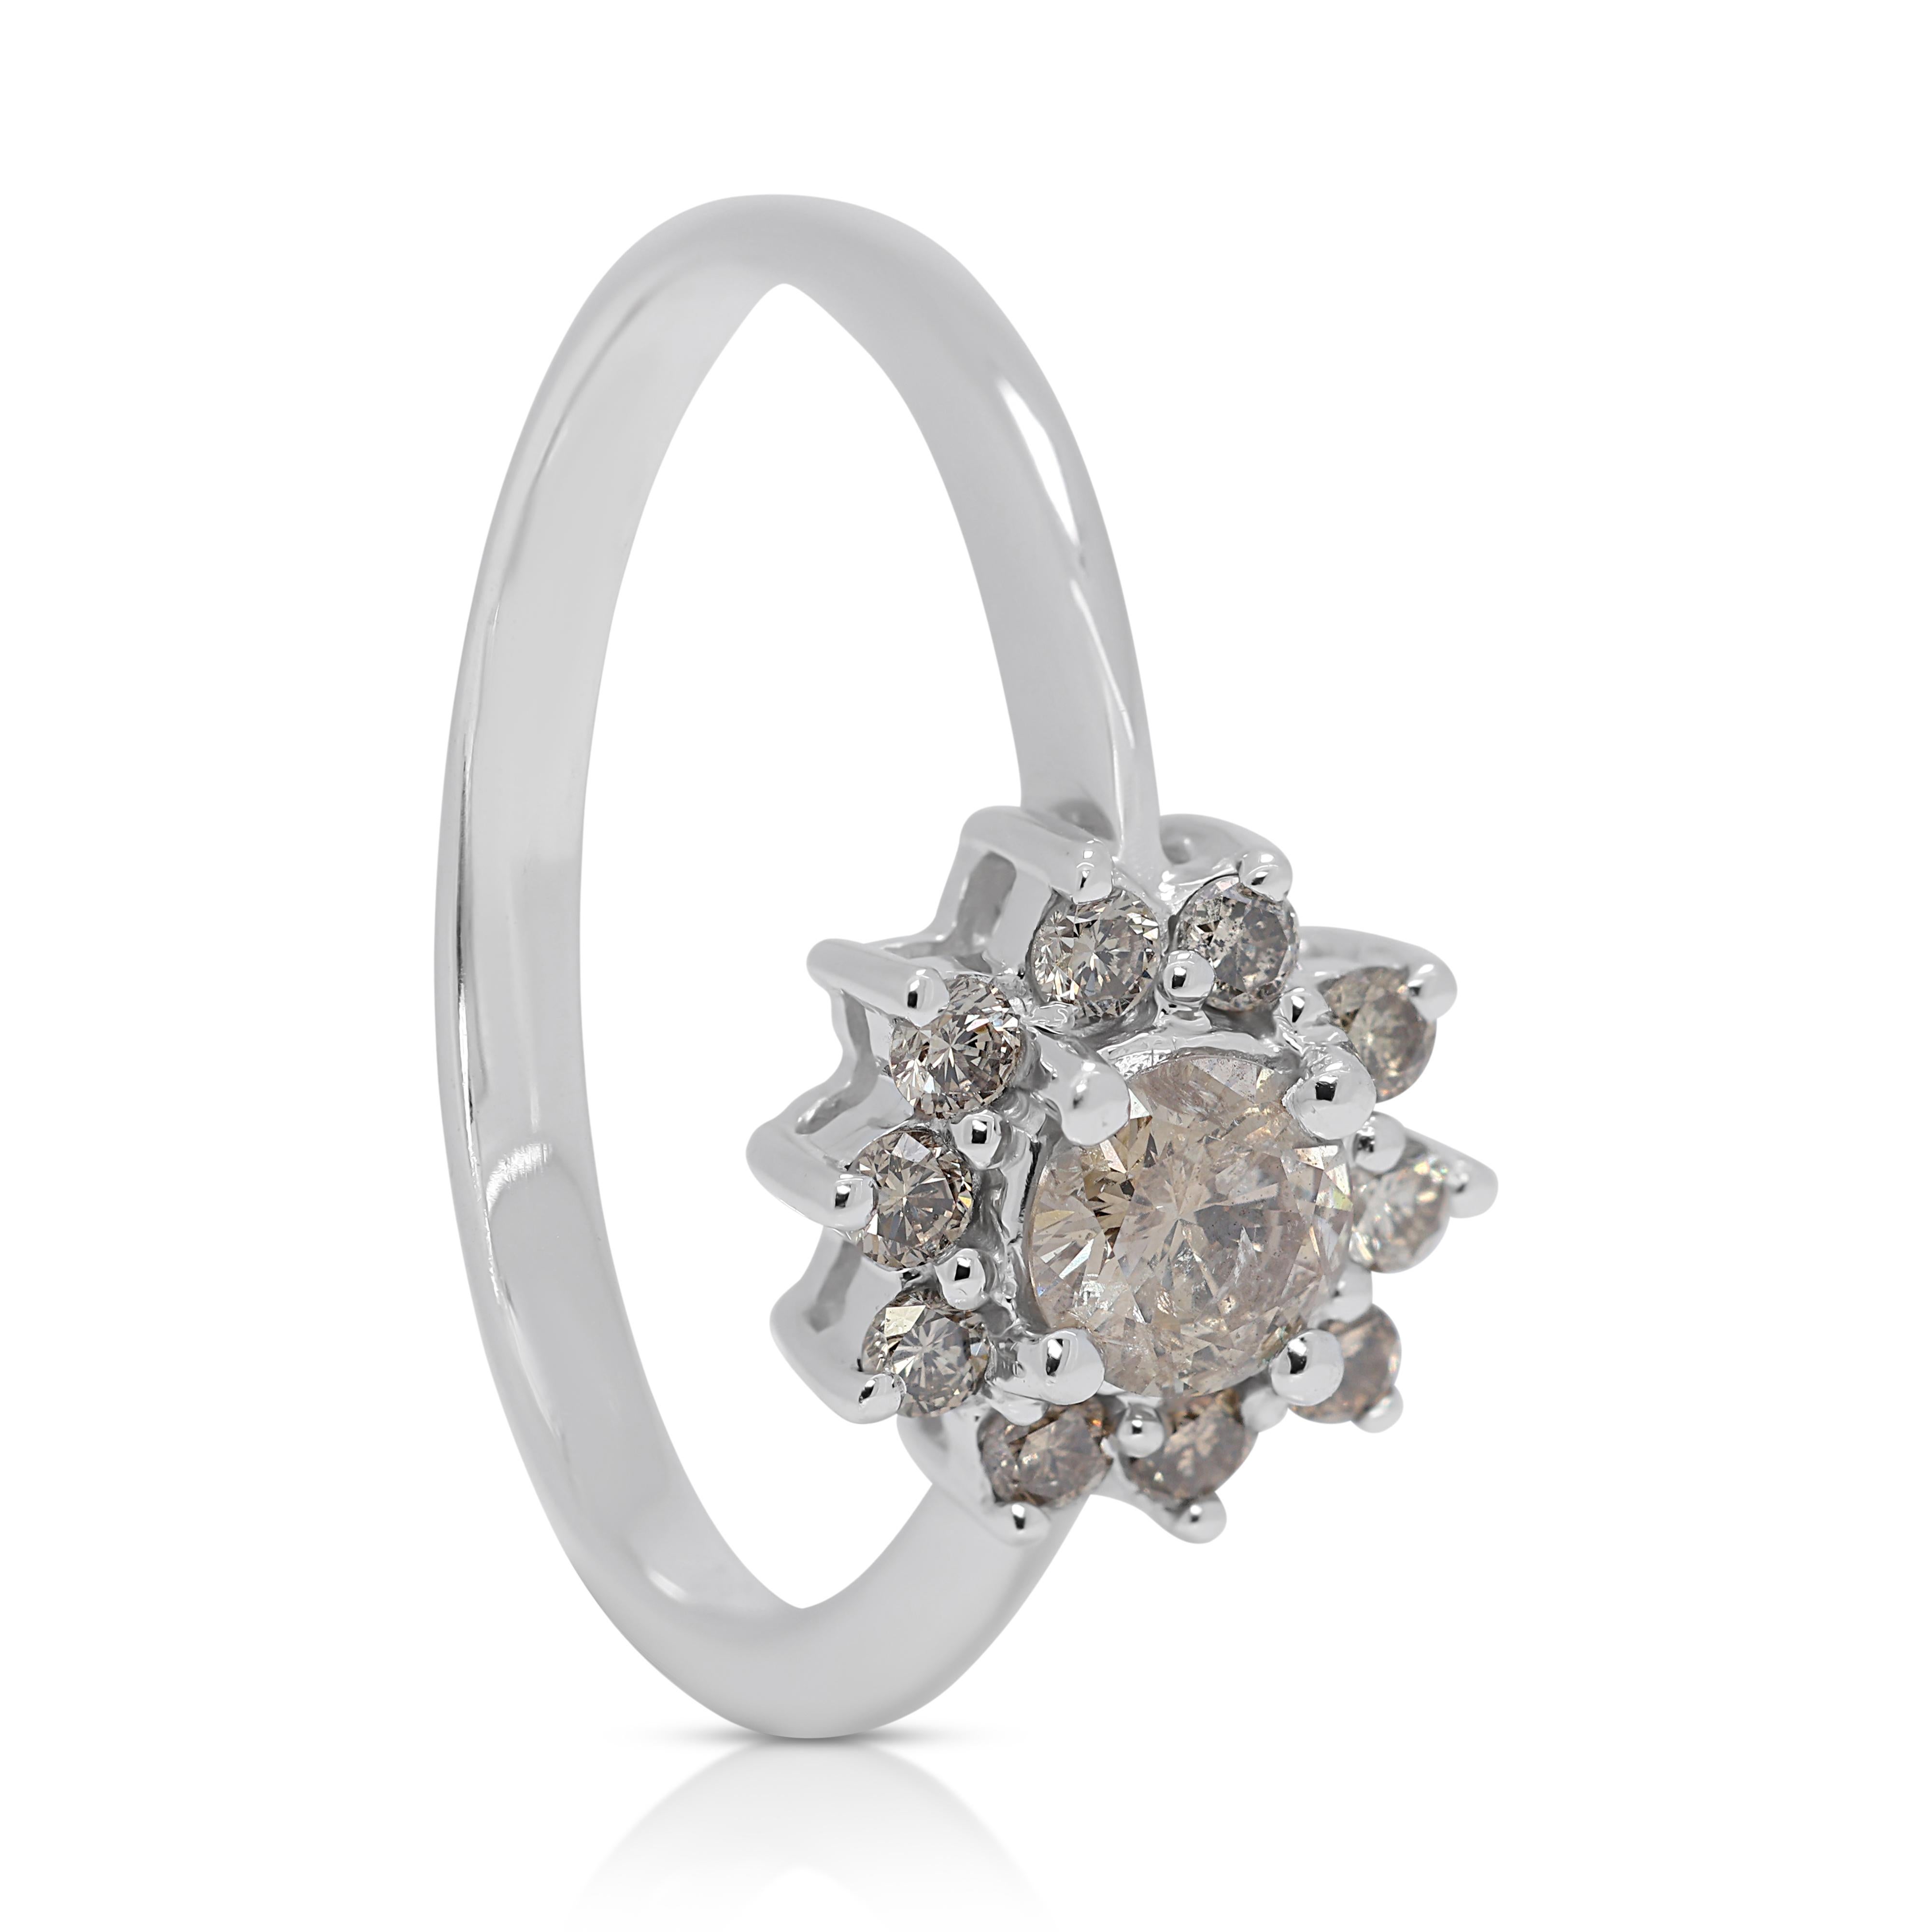 Sophisticated 0.57ct Diamonds Flower-Shaped Ring in 18k White Gold  In Excellent Condition For Sale In רמת גן, IL